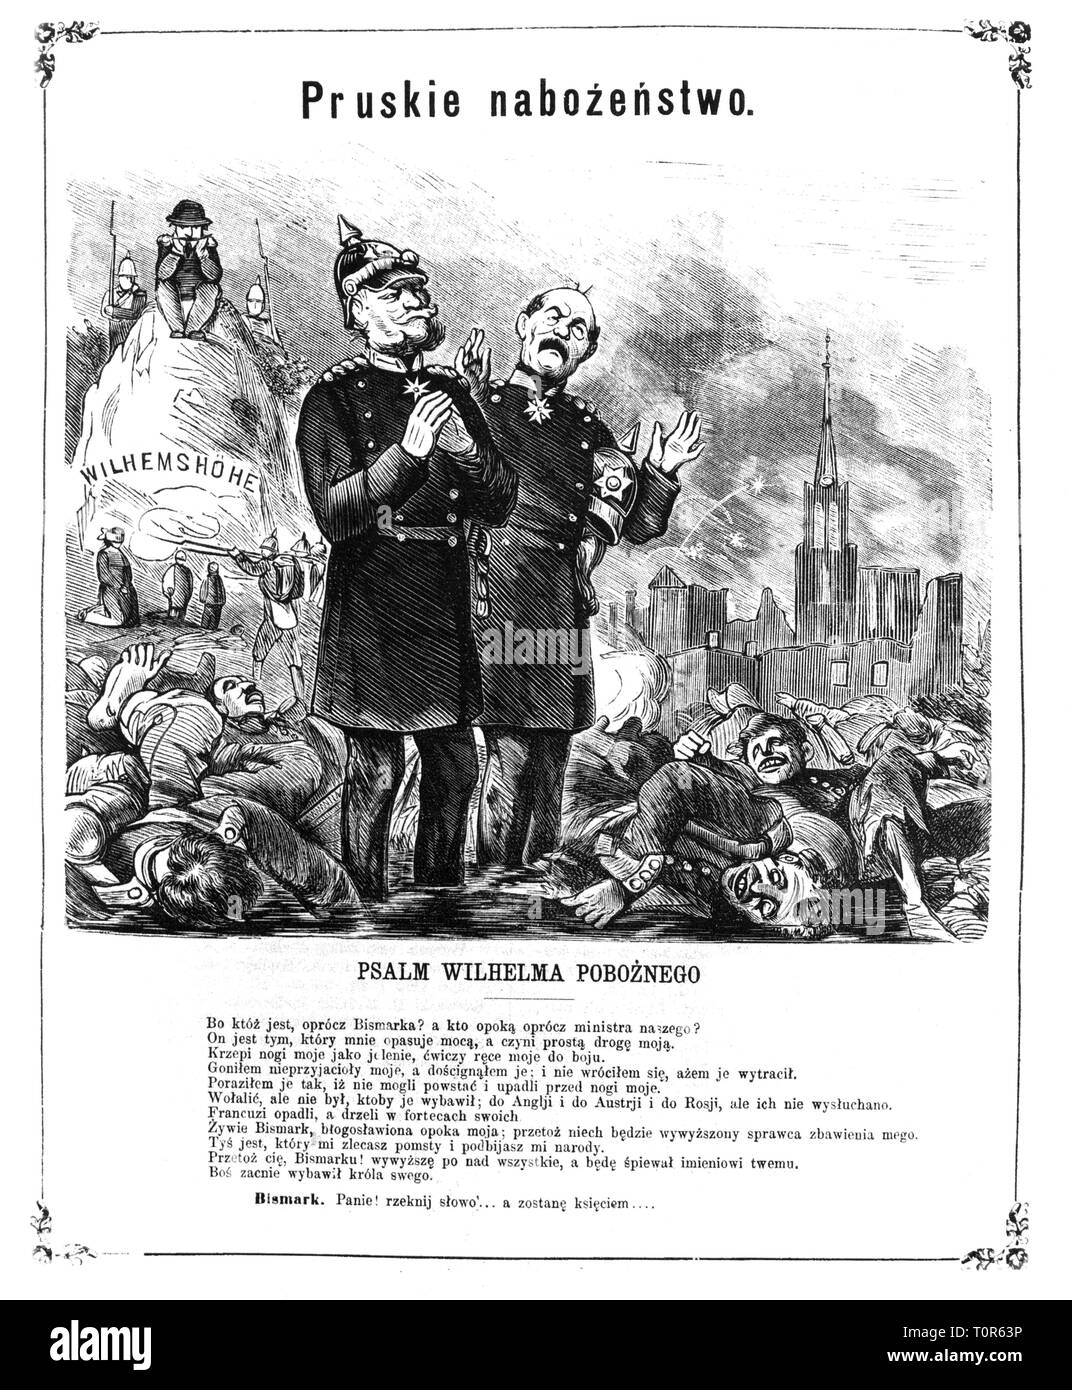 Franco-Prussian War 1870 - 1871, caricature, Prussian mass, drawing, 'Djabel', Krakow, 7.10.1870, satire, caricature, caricatures, cartoon, cartoons, Polish press, Poland, Galicia, Austria, German - French, Germany, France, William I, king of Prussia, Otto von Bismarck, Napoleon III in exile, dead body, dead bodies, corpse, corpses, pile, piles, war crime, war crimes, wartime atrocity, people, religion, religions, psalm, psalms, 19th century, historic, historical, Additional-Rights-Clearance-Info-Not-Available Stock Photo